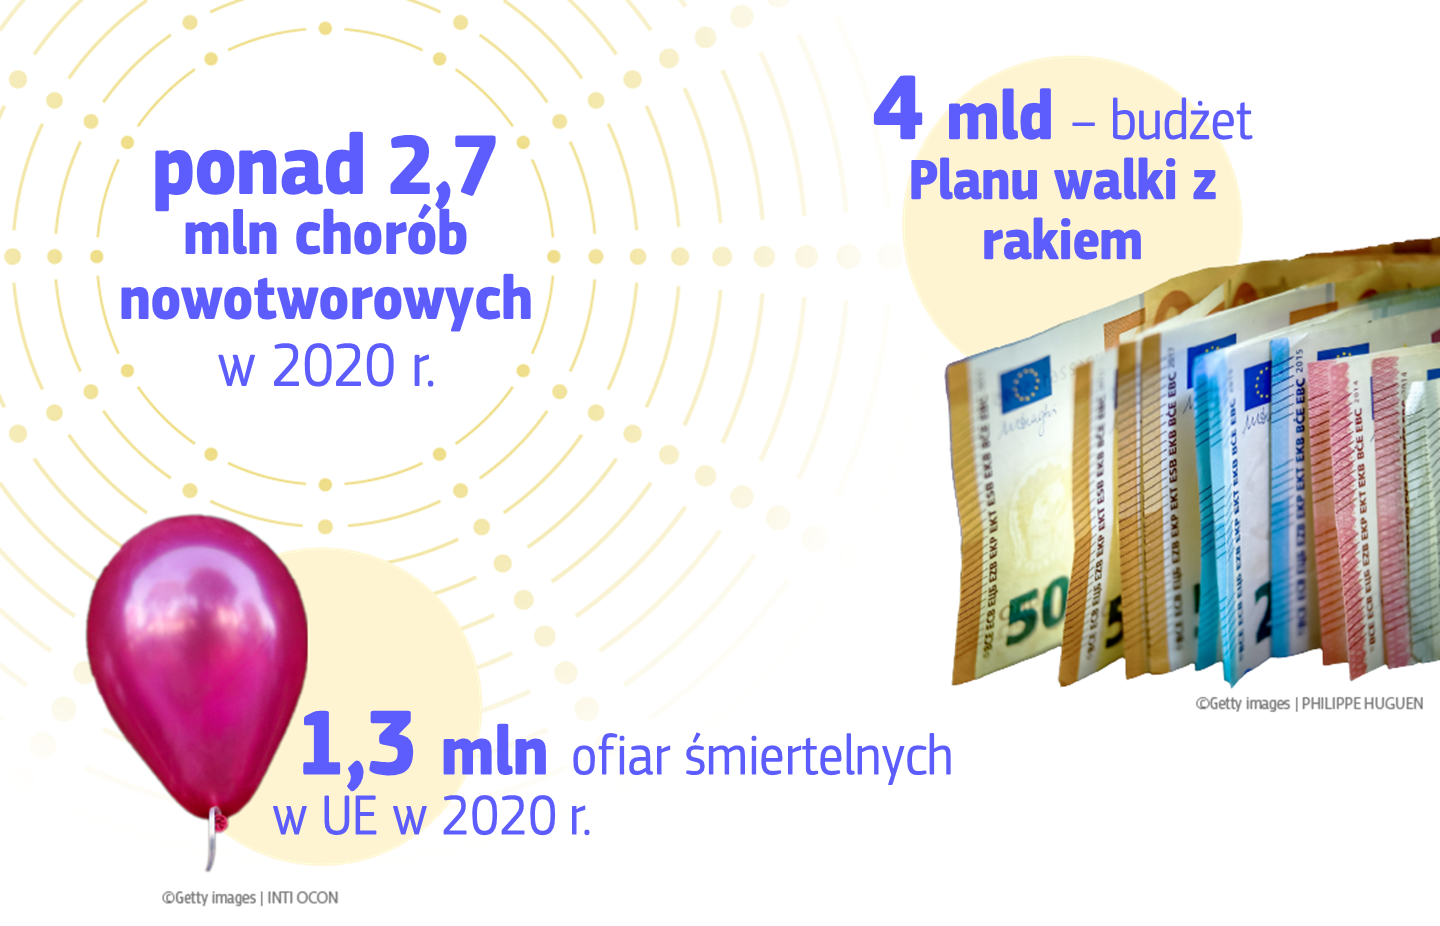 Infographic showing information on the EU's cancer plan